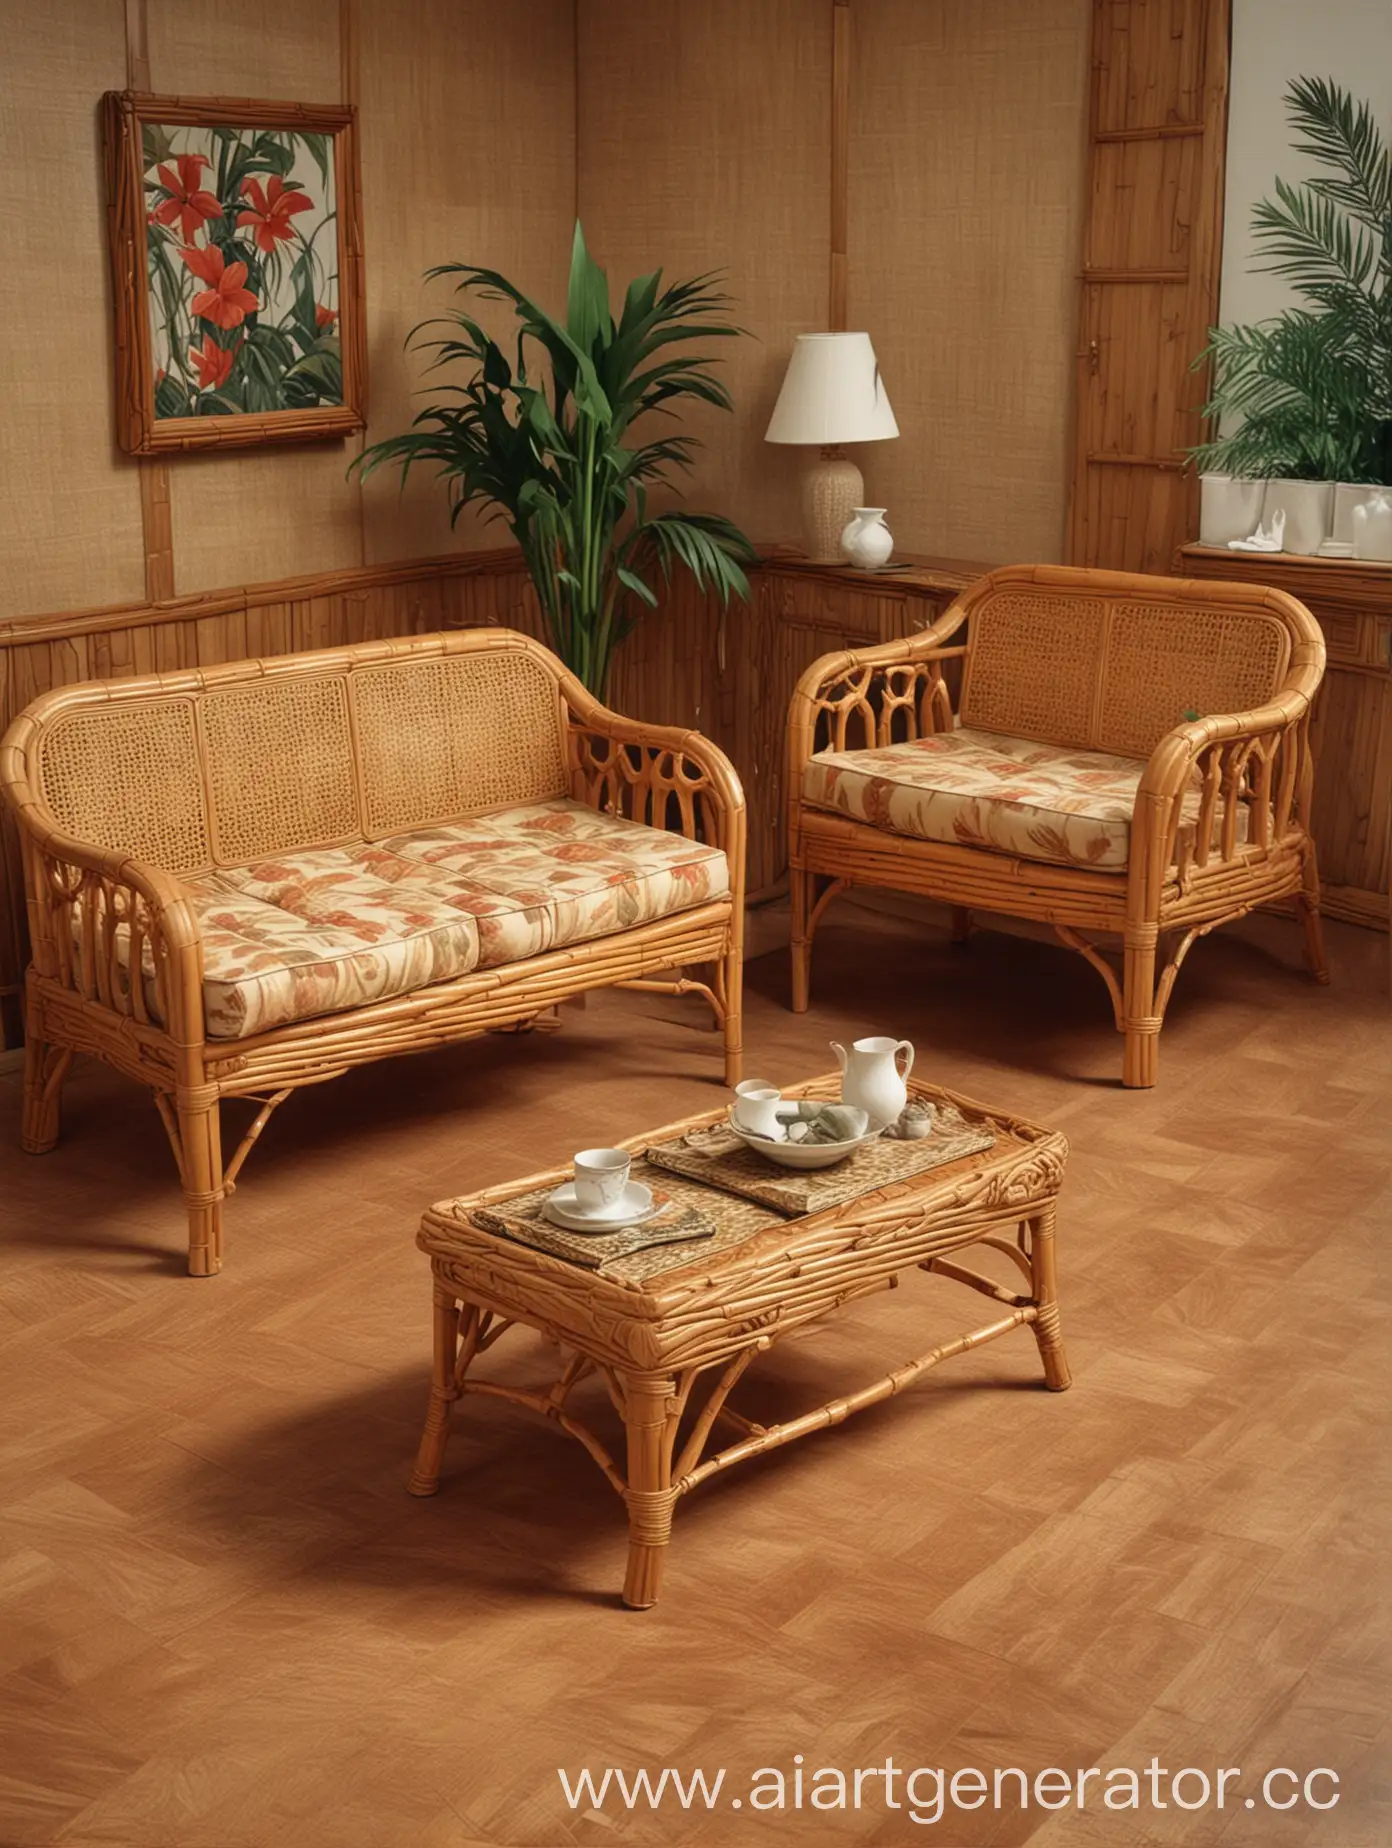 Nostalgic-80s-Home-Interior-with-Rattan-and-Bamboo-Dcor